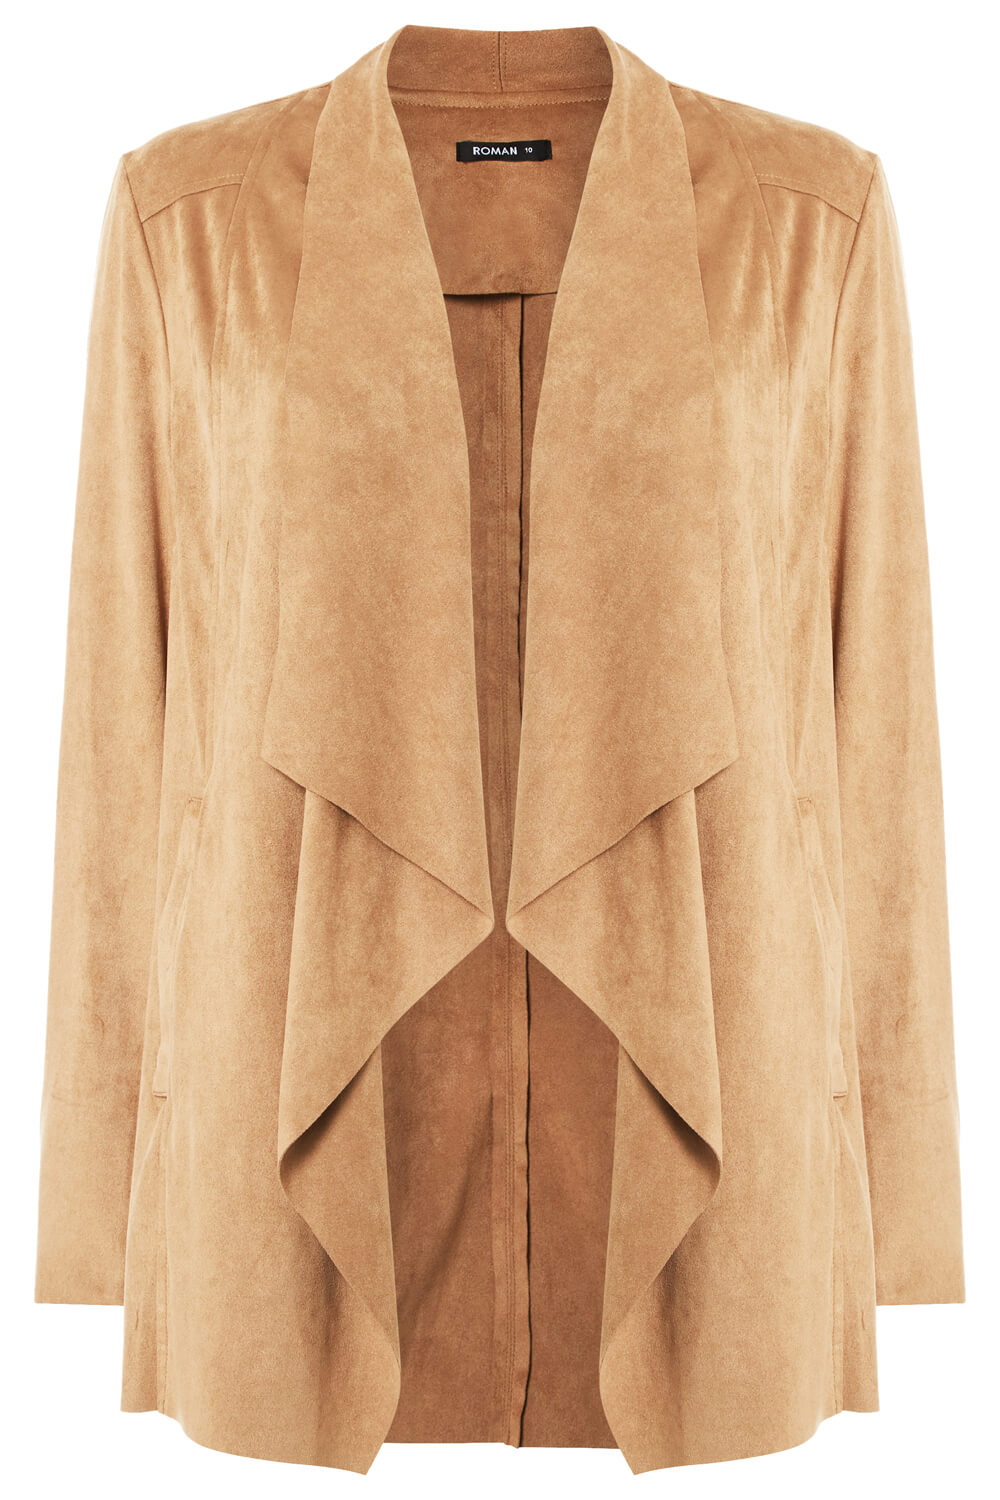 Camel  Faux Suede Waterfall Front Jacket, Image 5 of 5